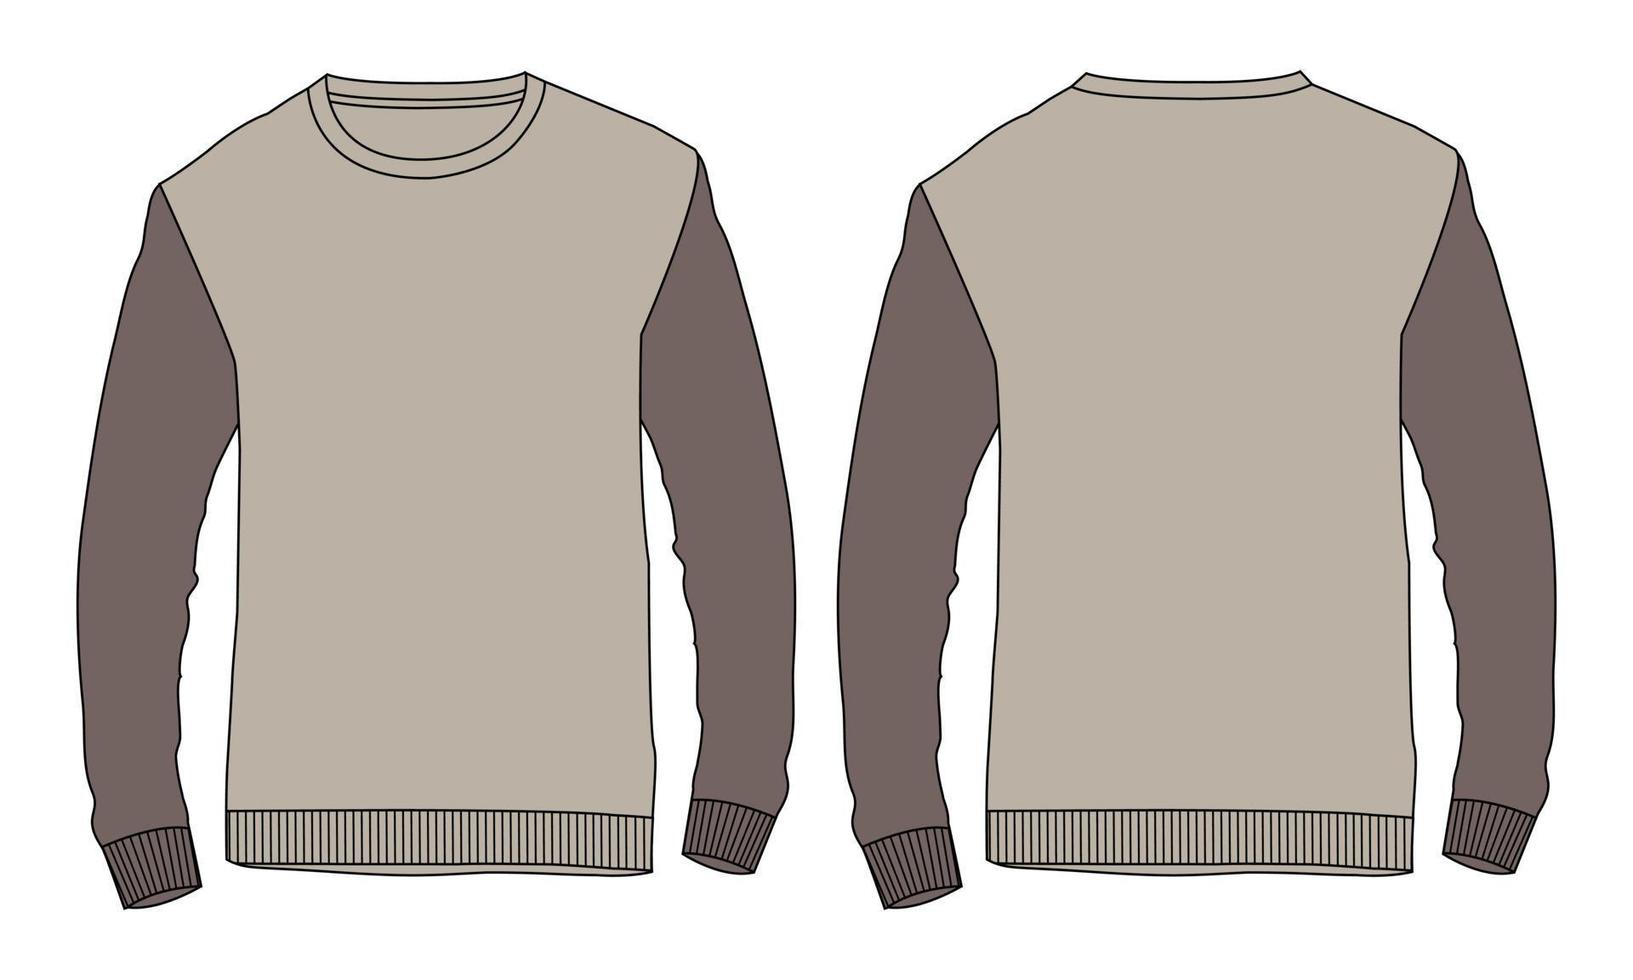 Two tone Khaki color Long sleeve Sweatshirt overall fashion Flat Sketches technical drawing vector template For men's. Apparel dress design Black Color mock up CAD illustration.